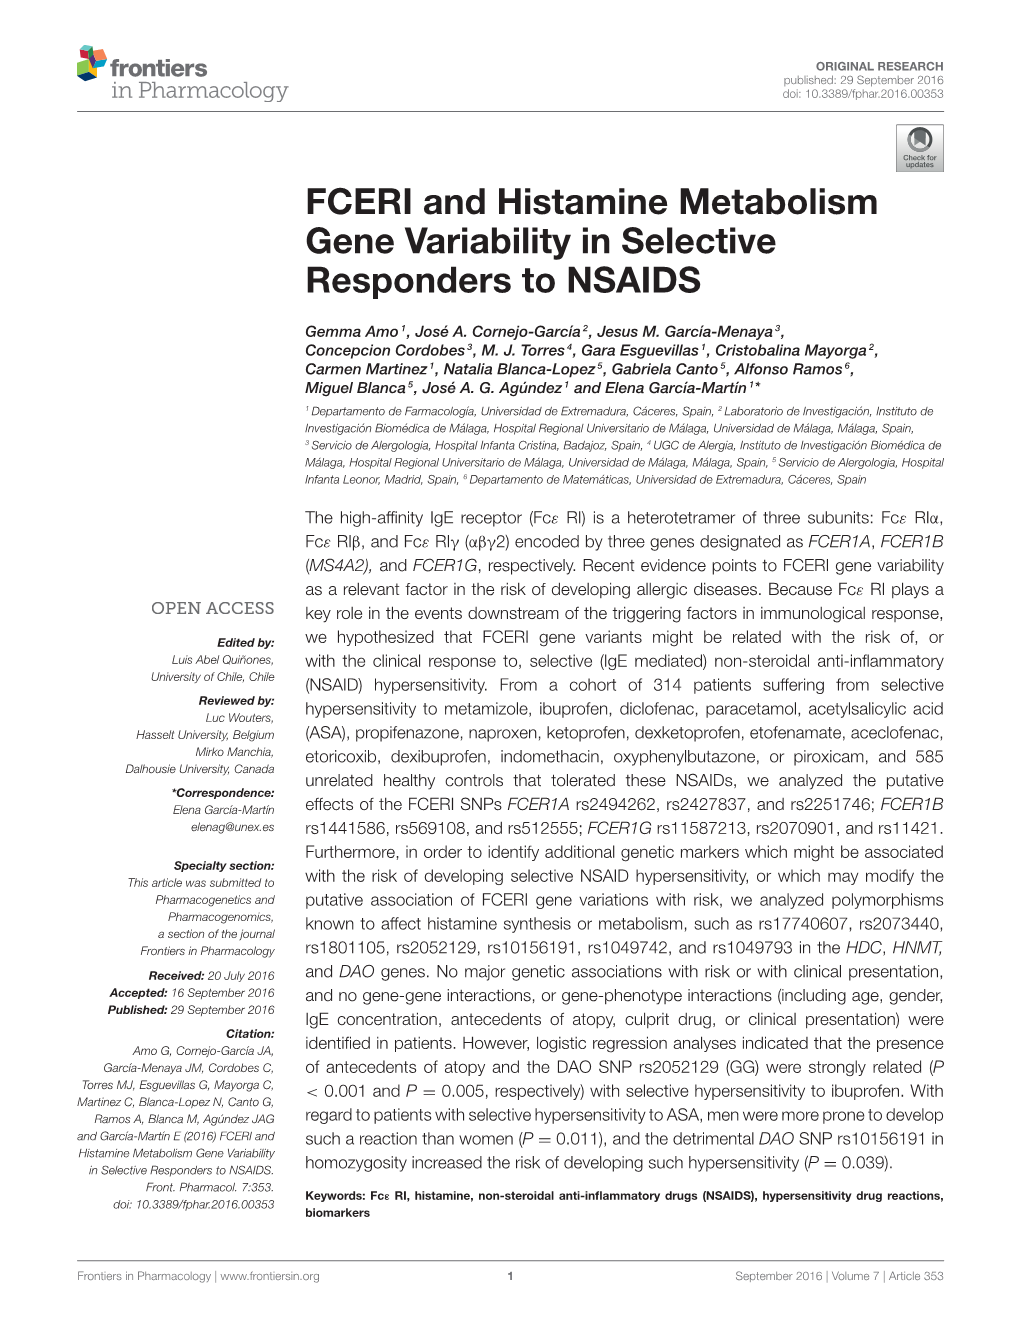 FCERI and Histamine Metabolism Gene Variability in Selective Responders to NSAIDS